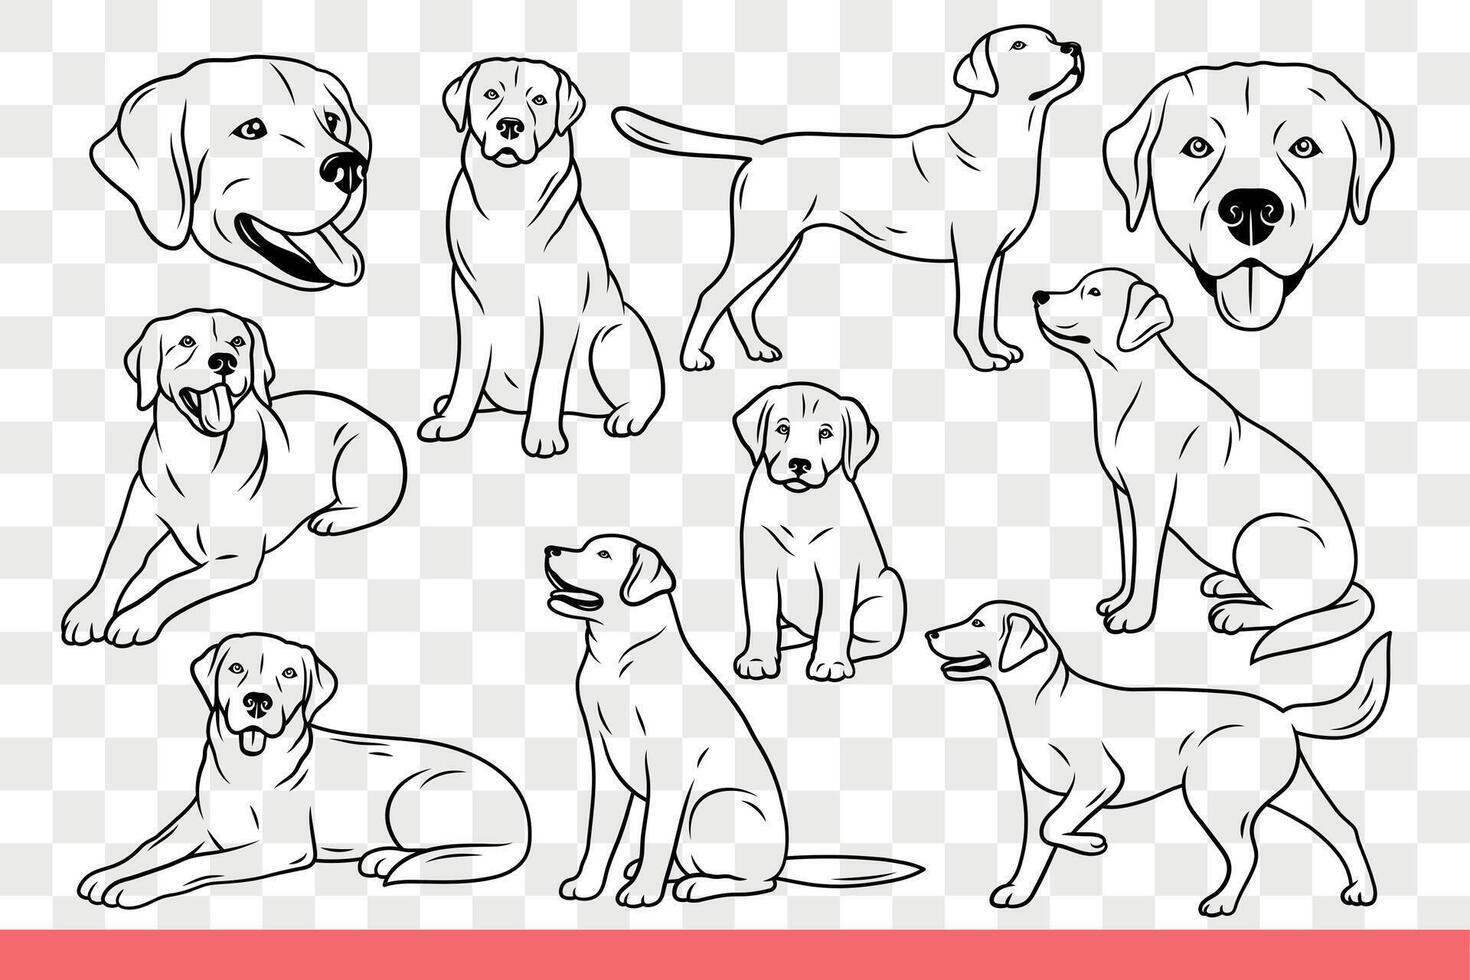 Dog of lobrador breed poses in different positions following commands of owner. Hand drawn doodle. vector